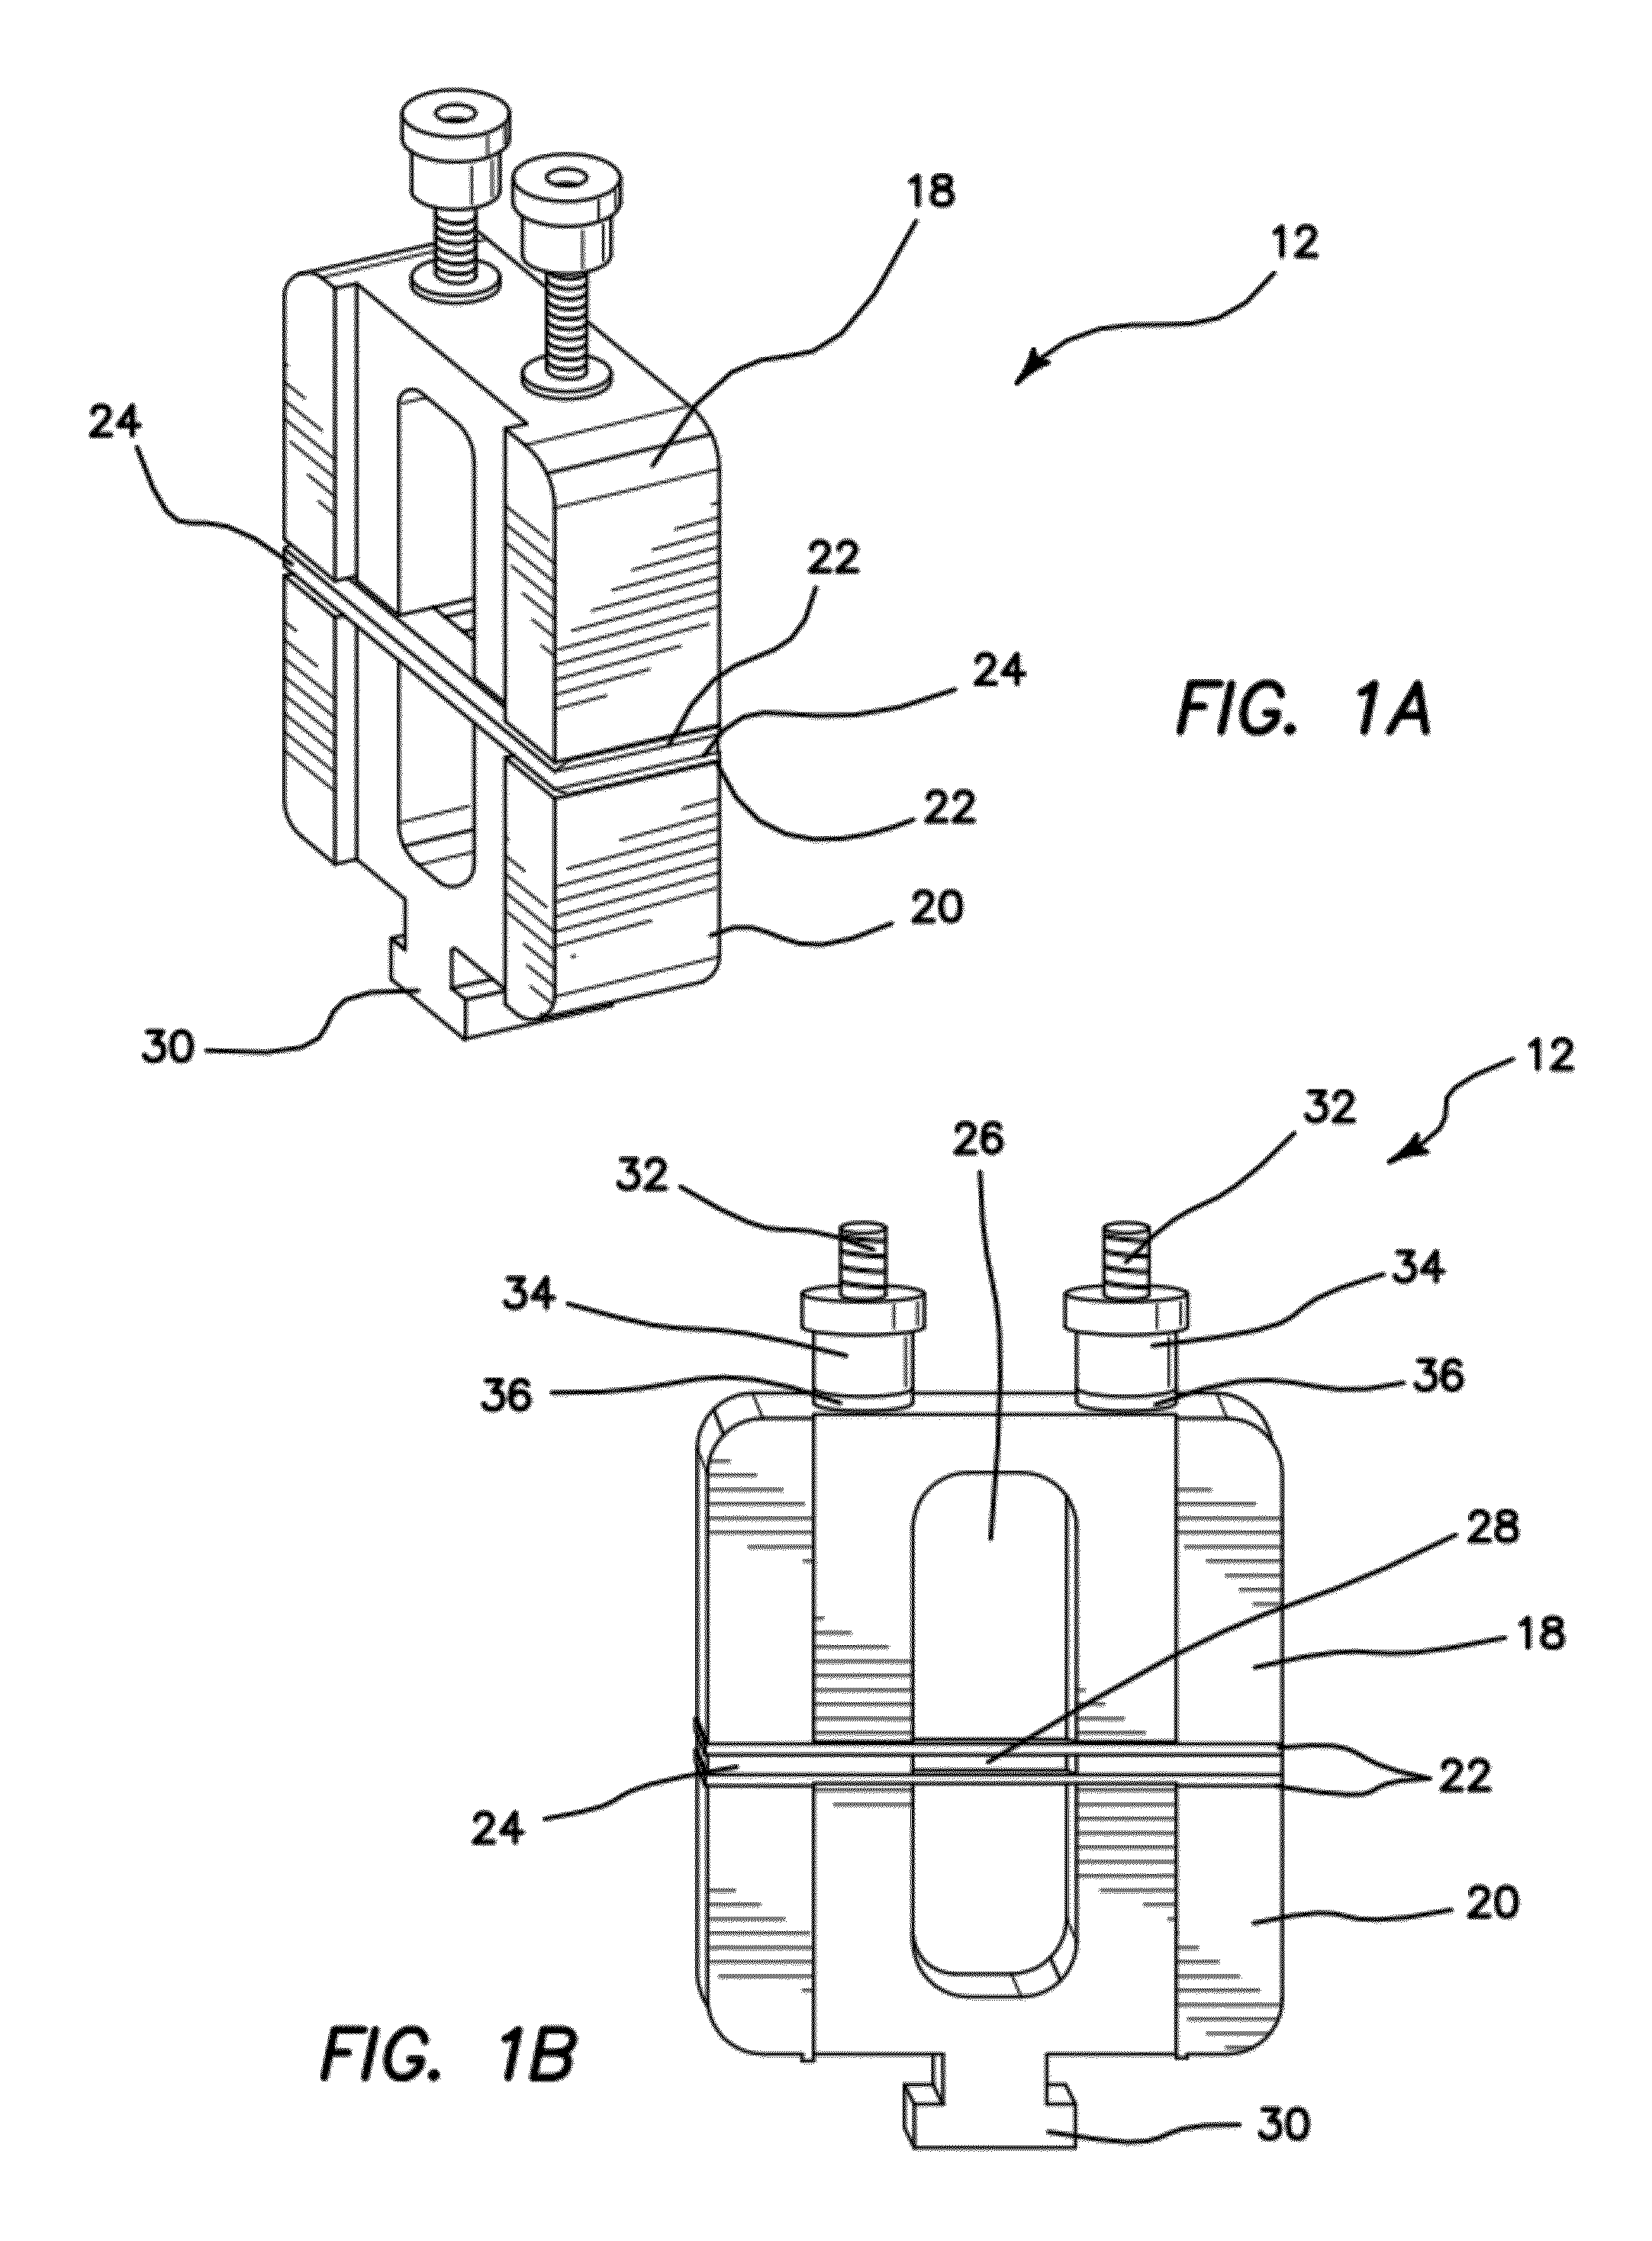 Apparatus and Method for Cutting Costal Cartilage